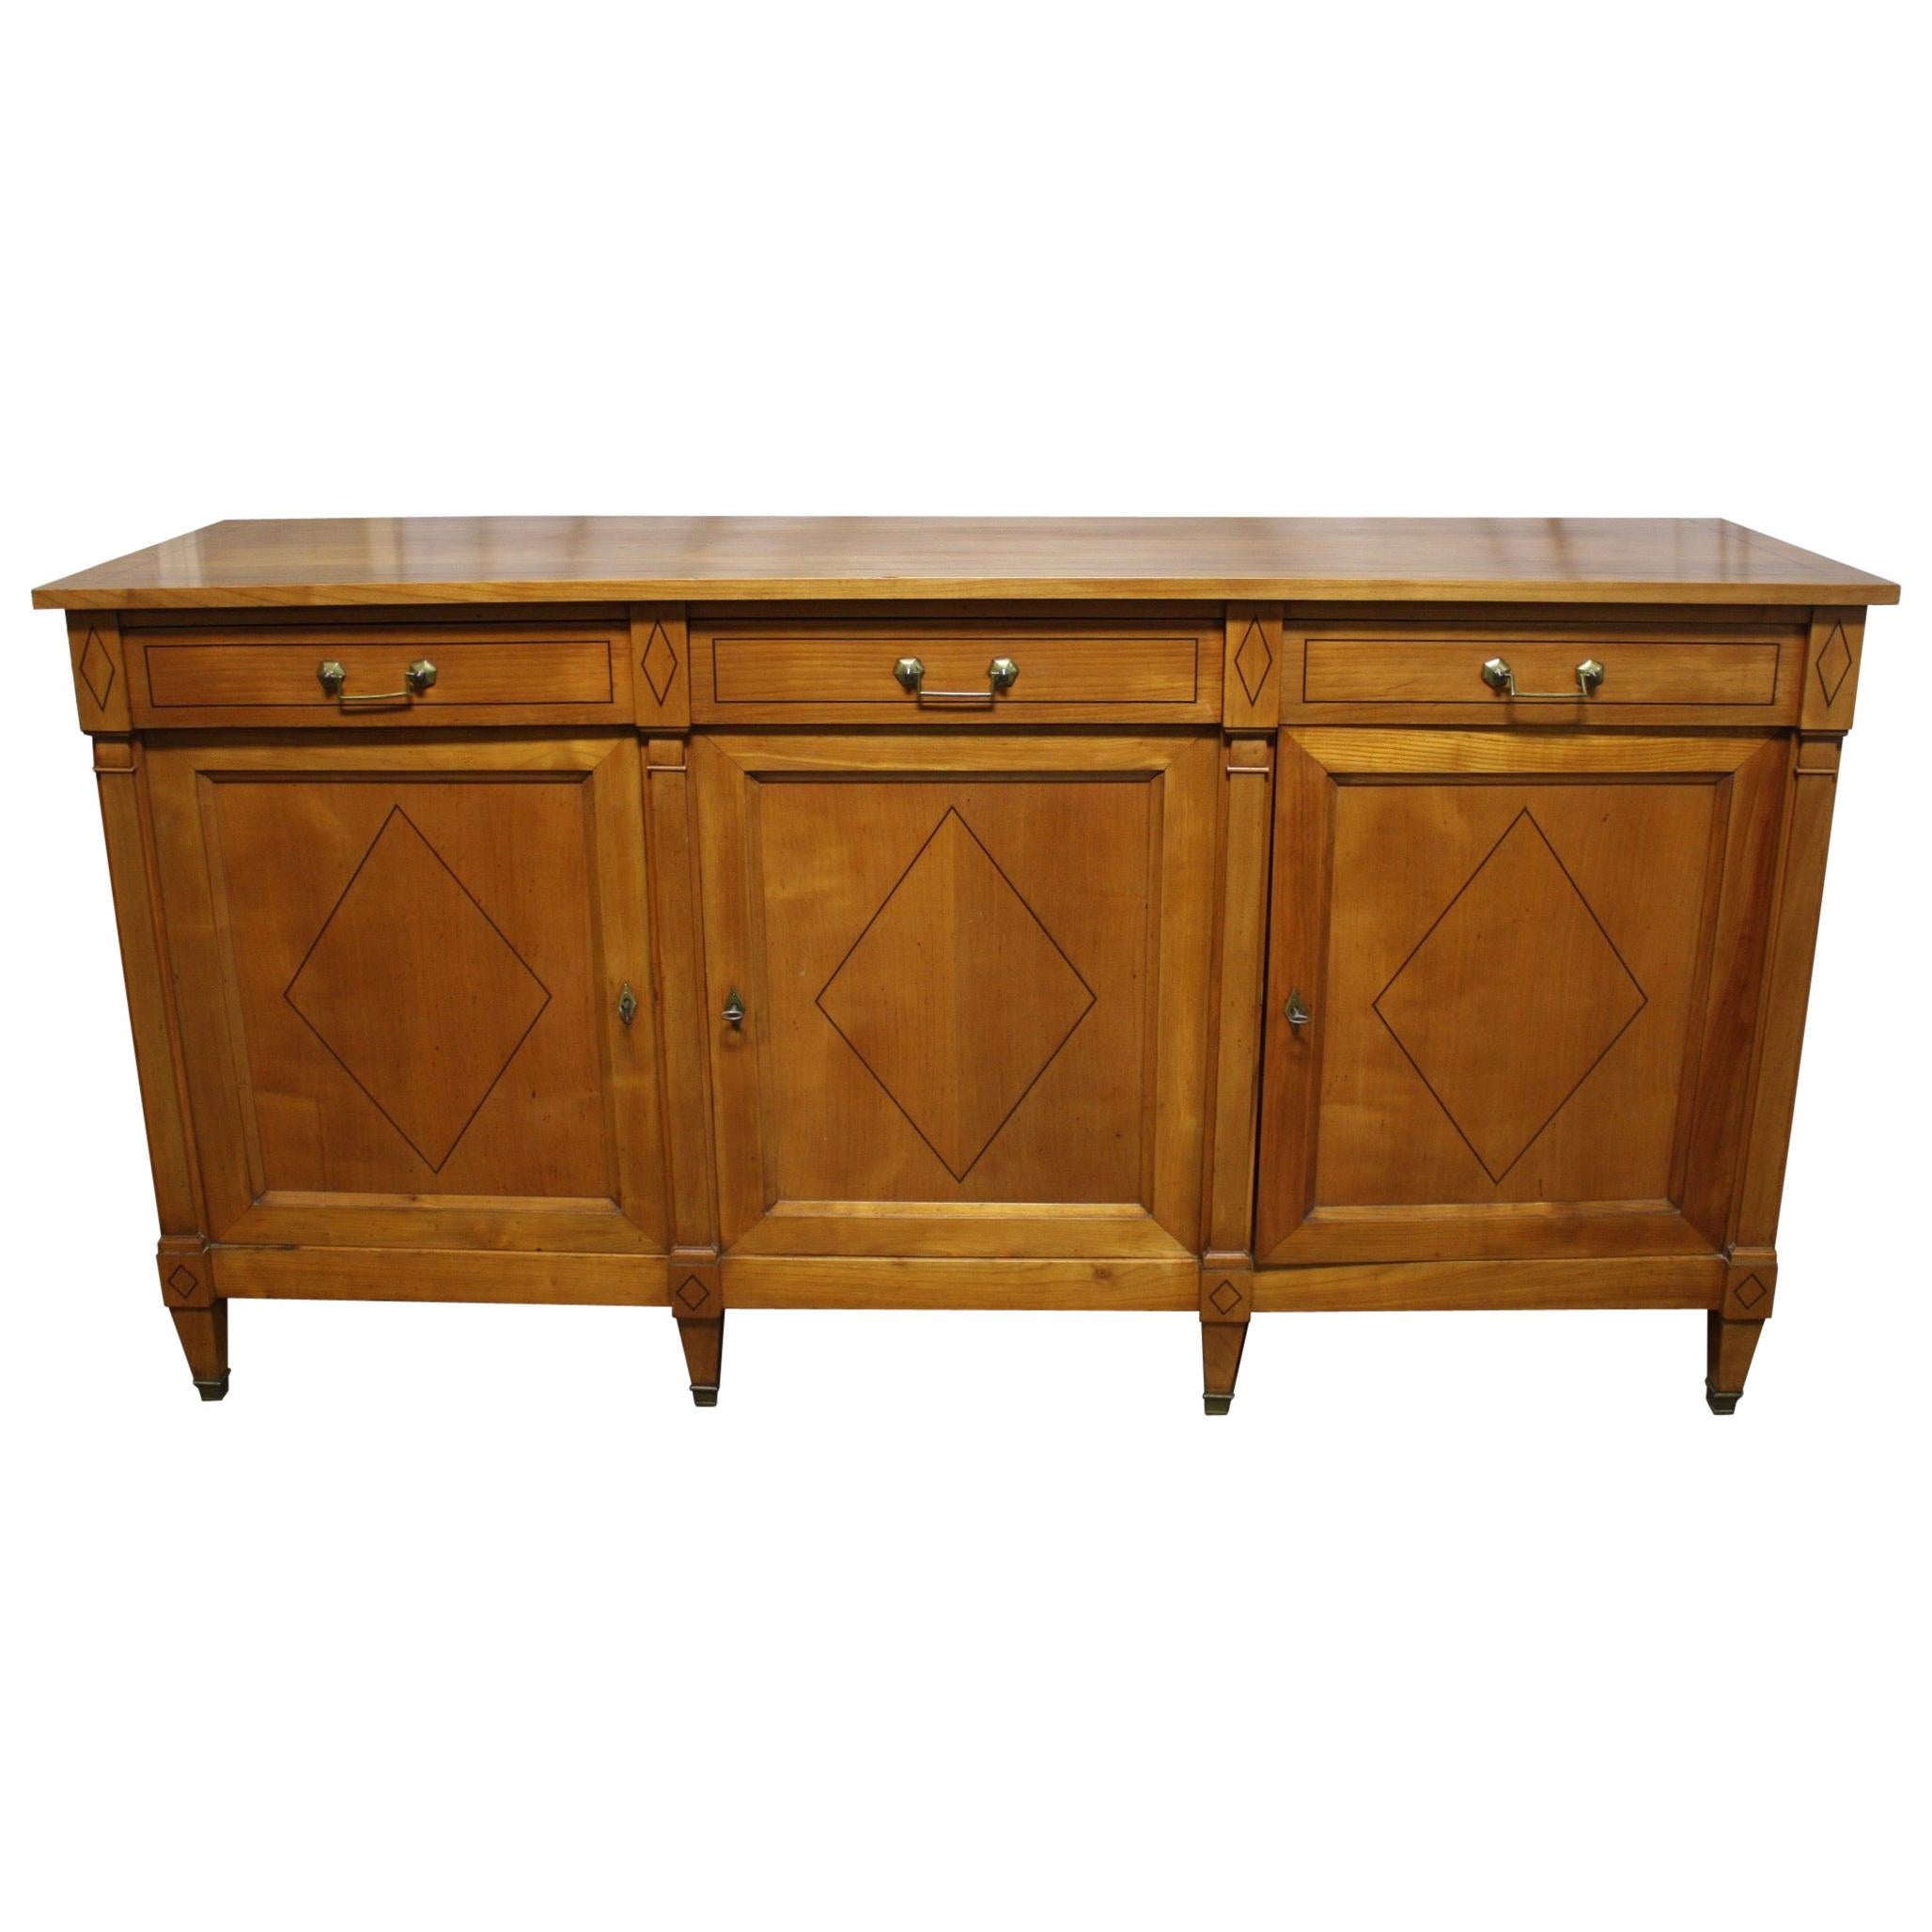 Early 20th Century French Directoire Sideboard